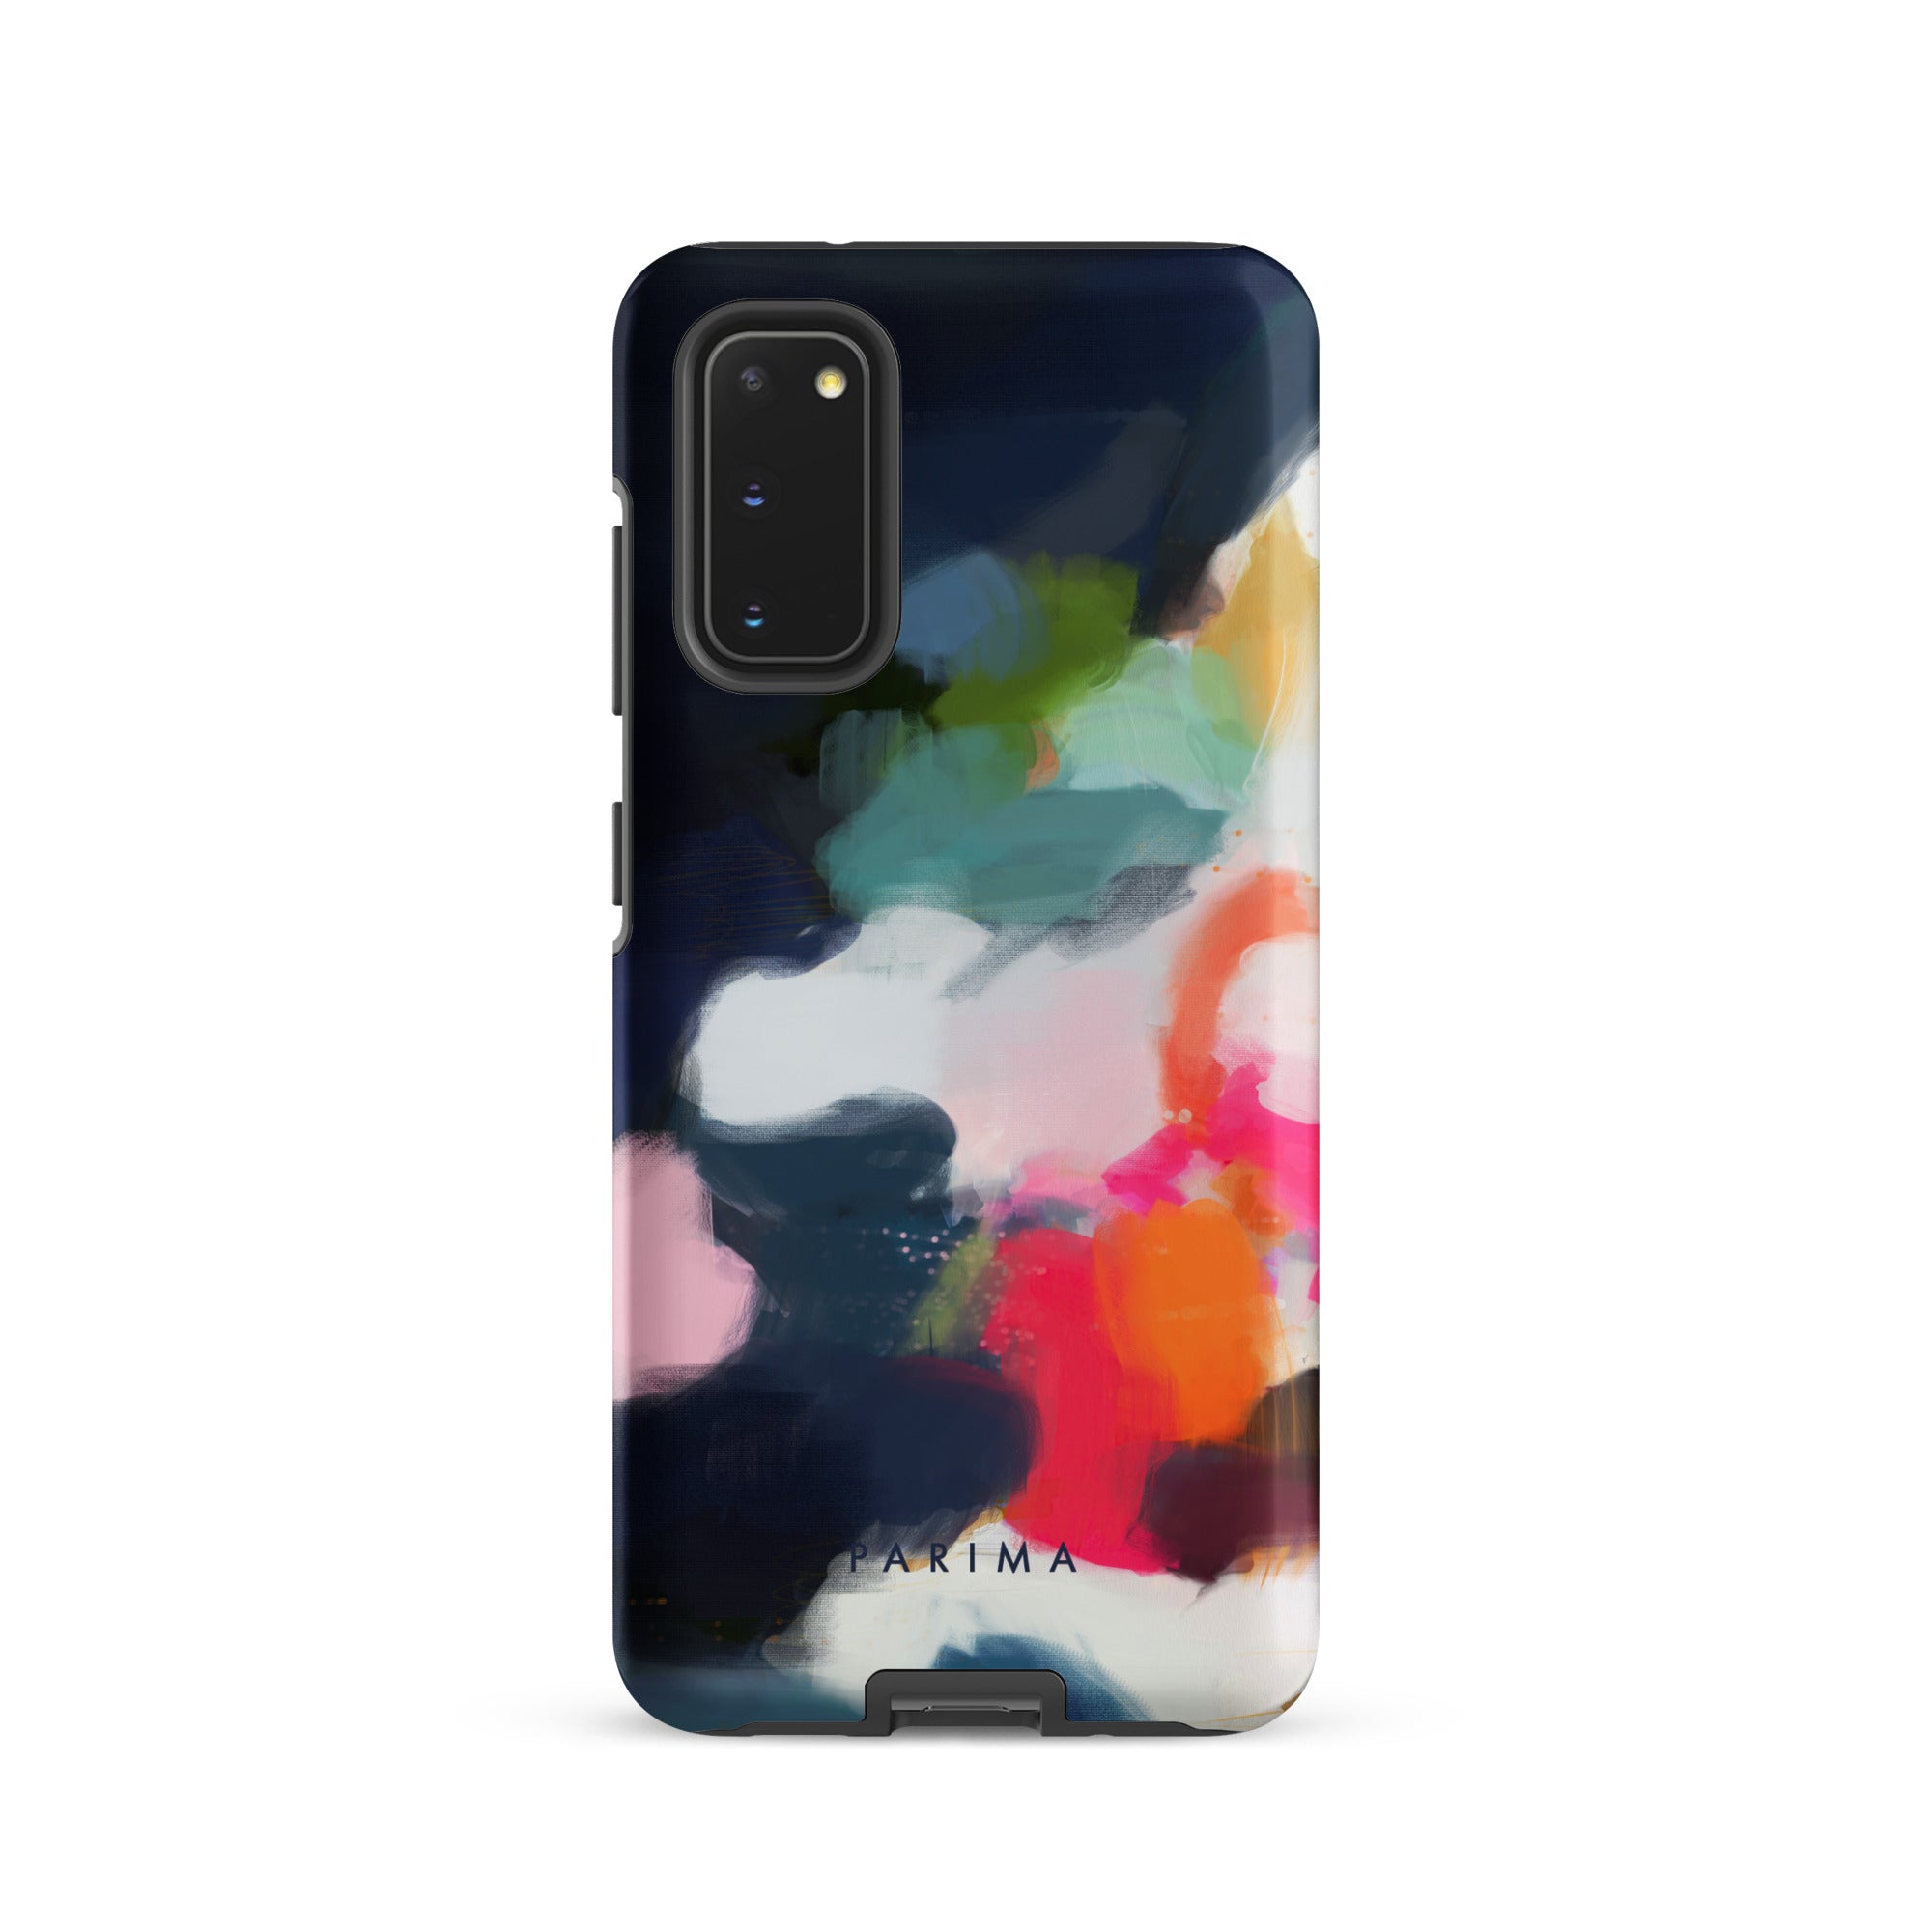 Eliza, blue and pink abstract art on Samsung Galaxy S20 tough case by Parima Studio